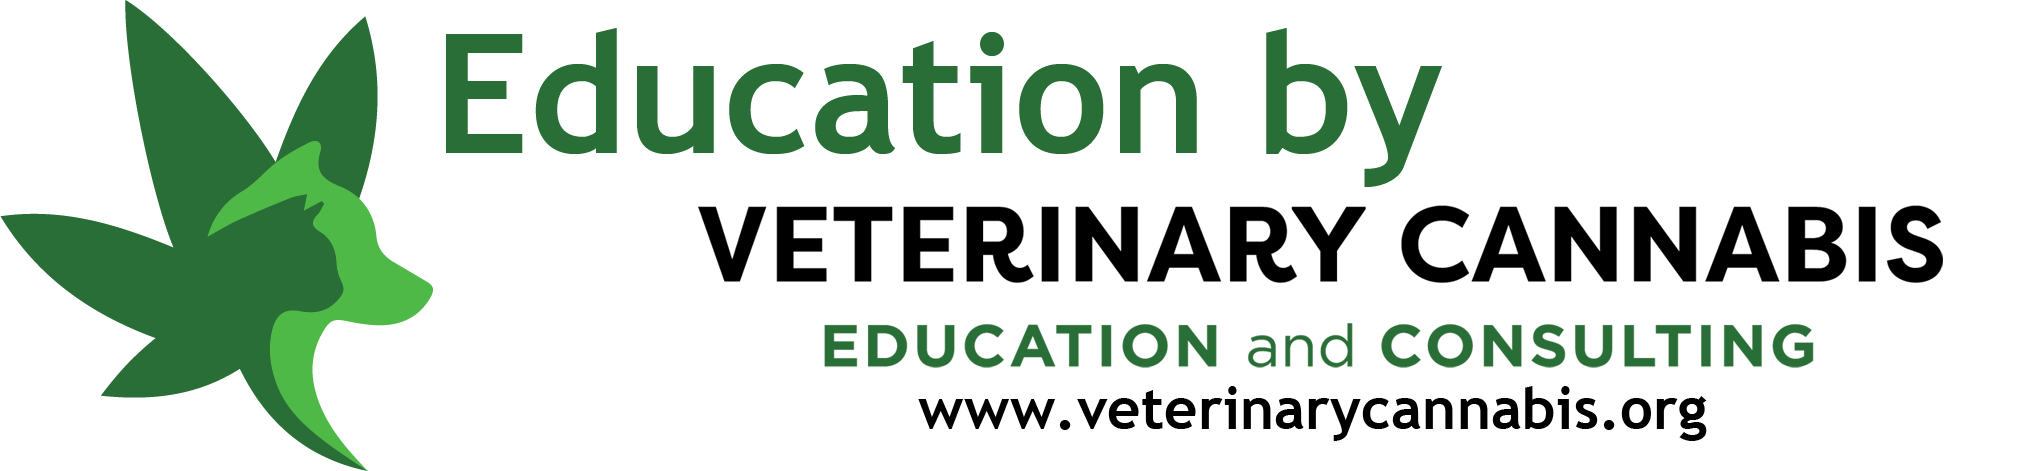 Education by Veterinary Cannabis Education and Consulting